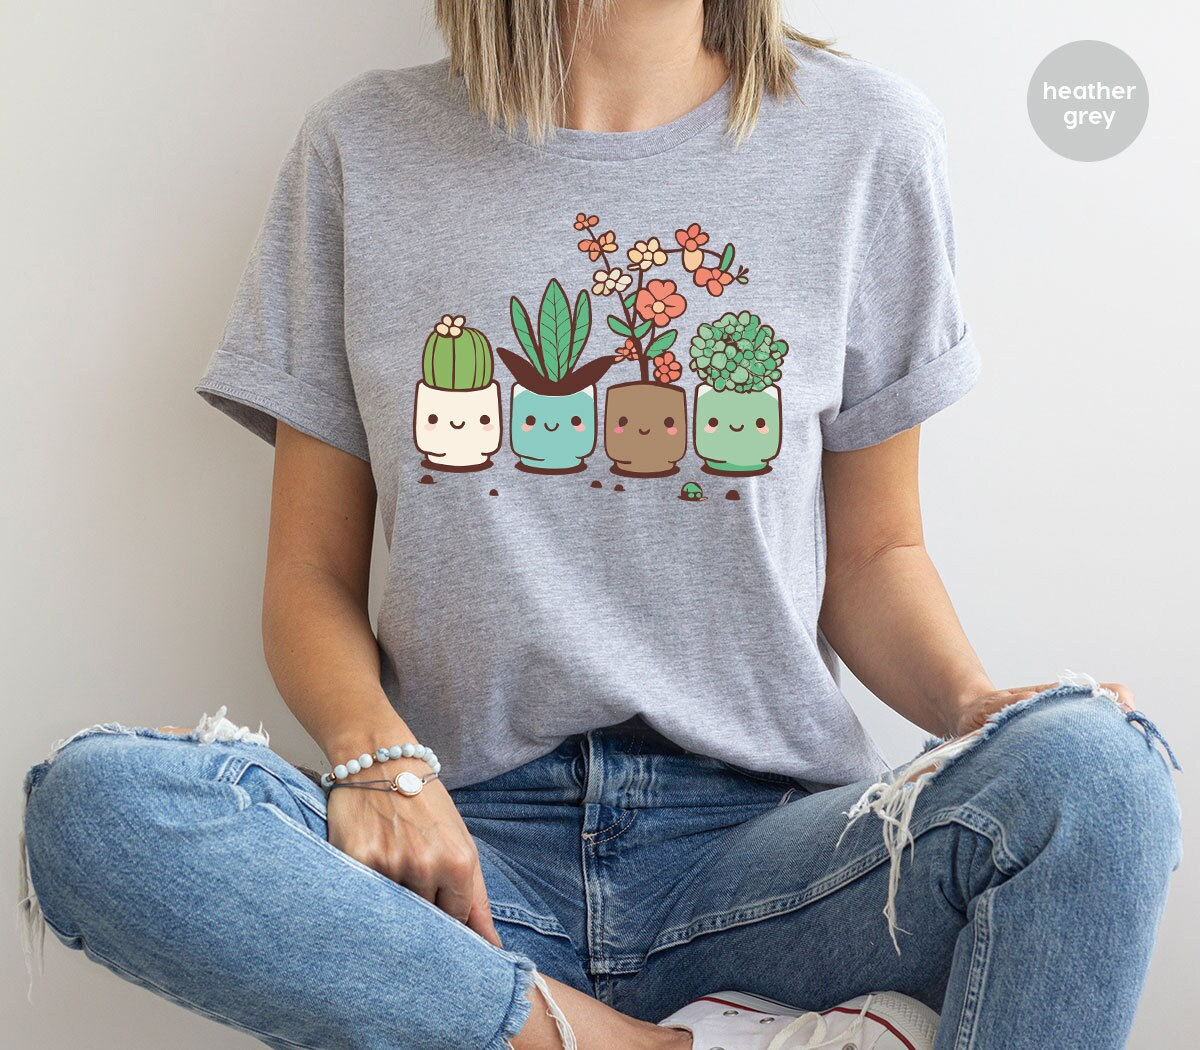 Funny T-shirts - Funny Guy T-shirts - Go Sit On A Cactus- Funny Guy T